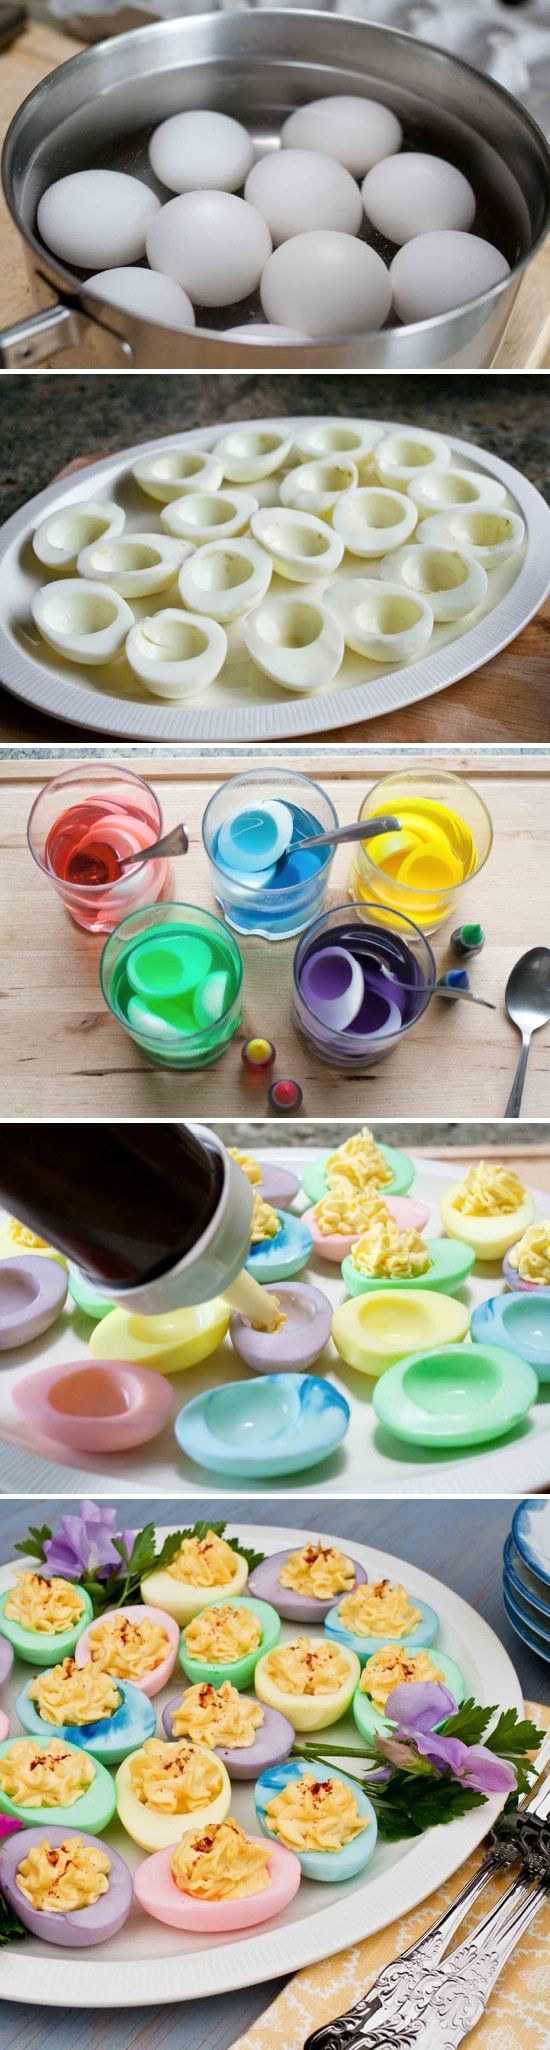 Delicious-colorful-Easter-eggs.2